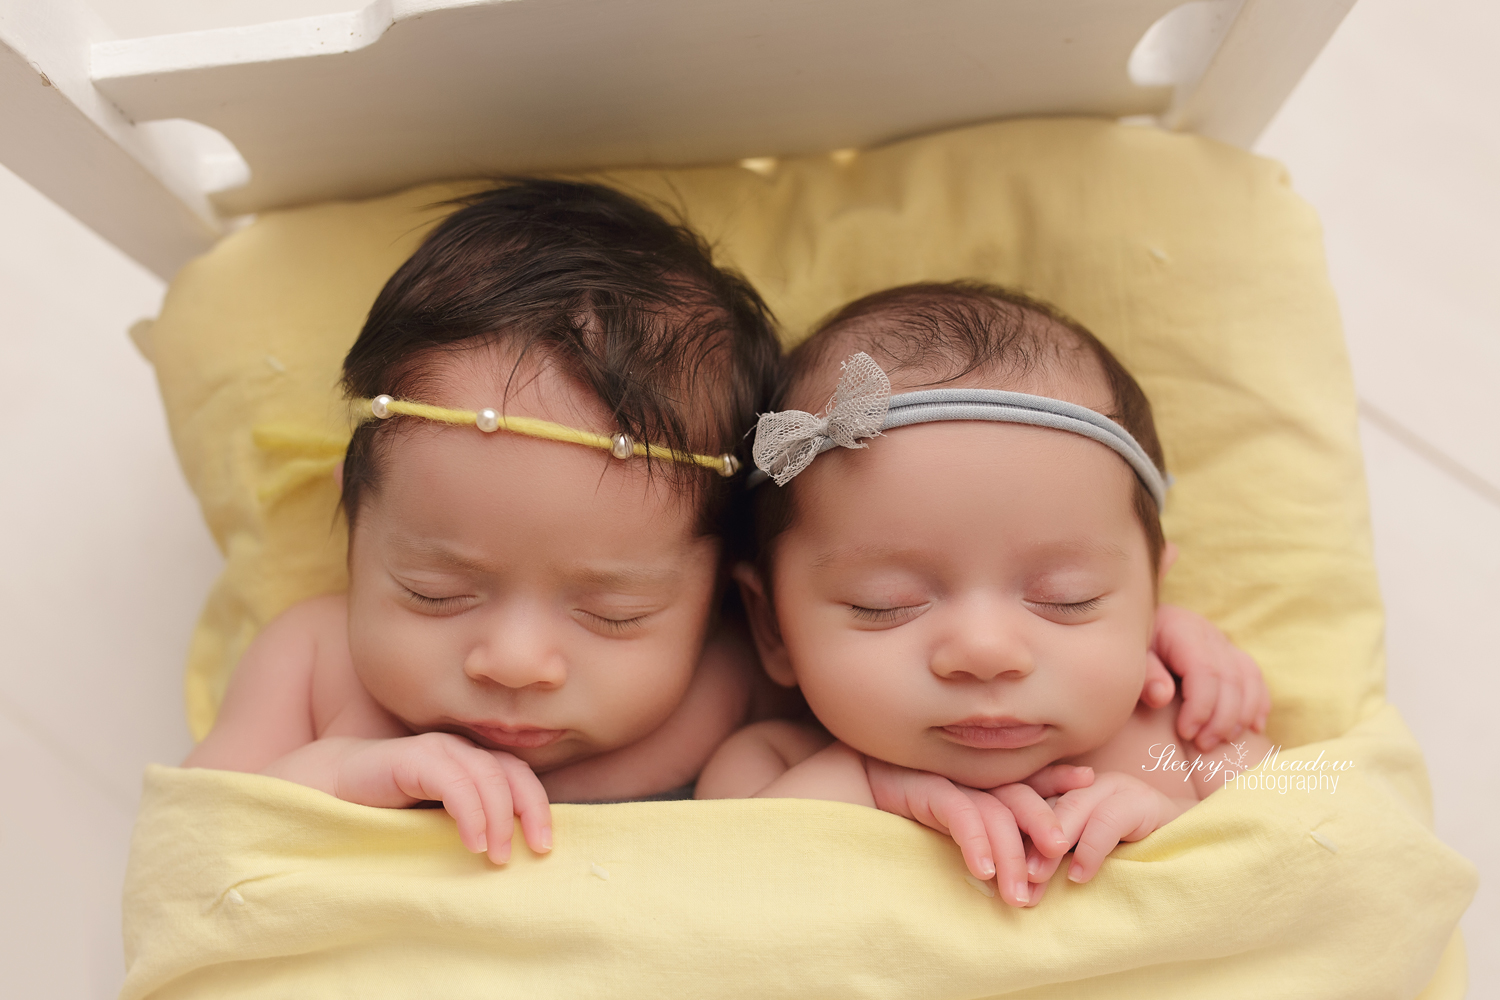 Adorable twin girls pose for their newborn session with Sleepy Meadow Photography of Milwaukee, WI.